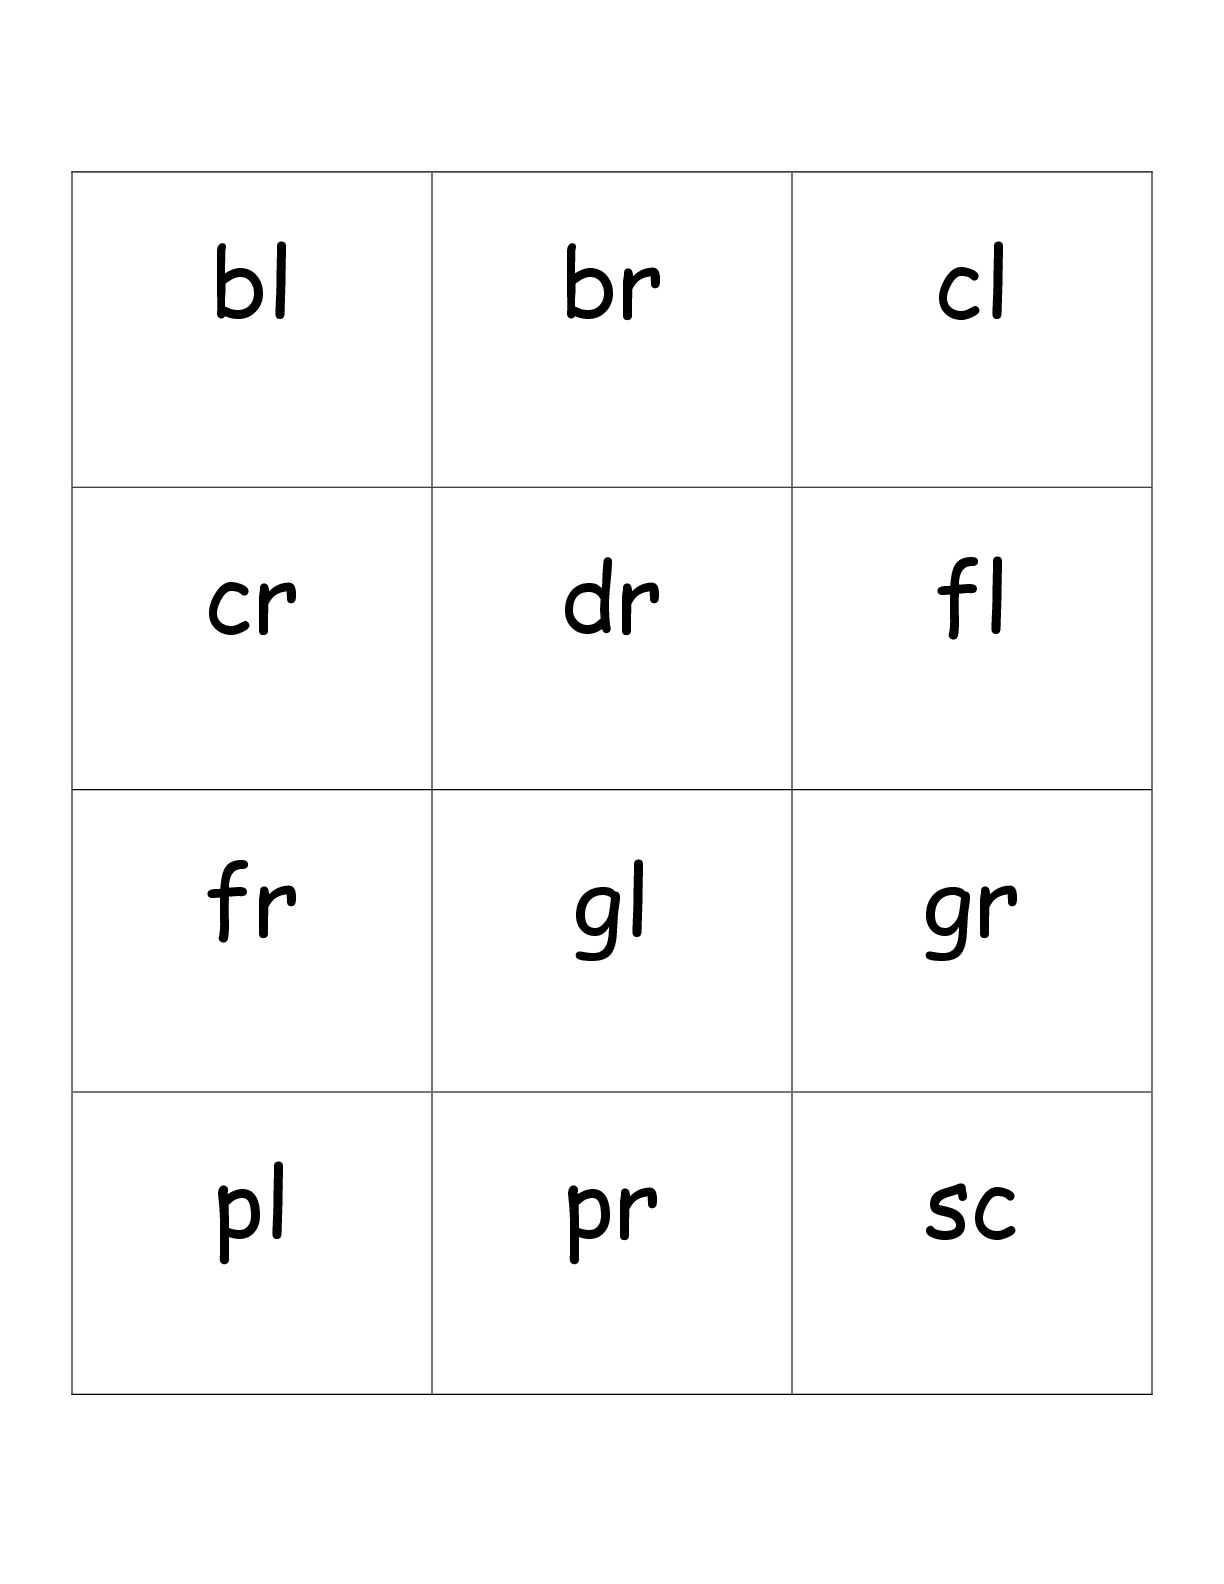 Second Grade Phonics Worksheets And Flashcards | Grade 1 Phonics Worksheets Free Printable